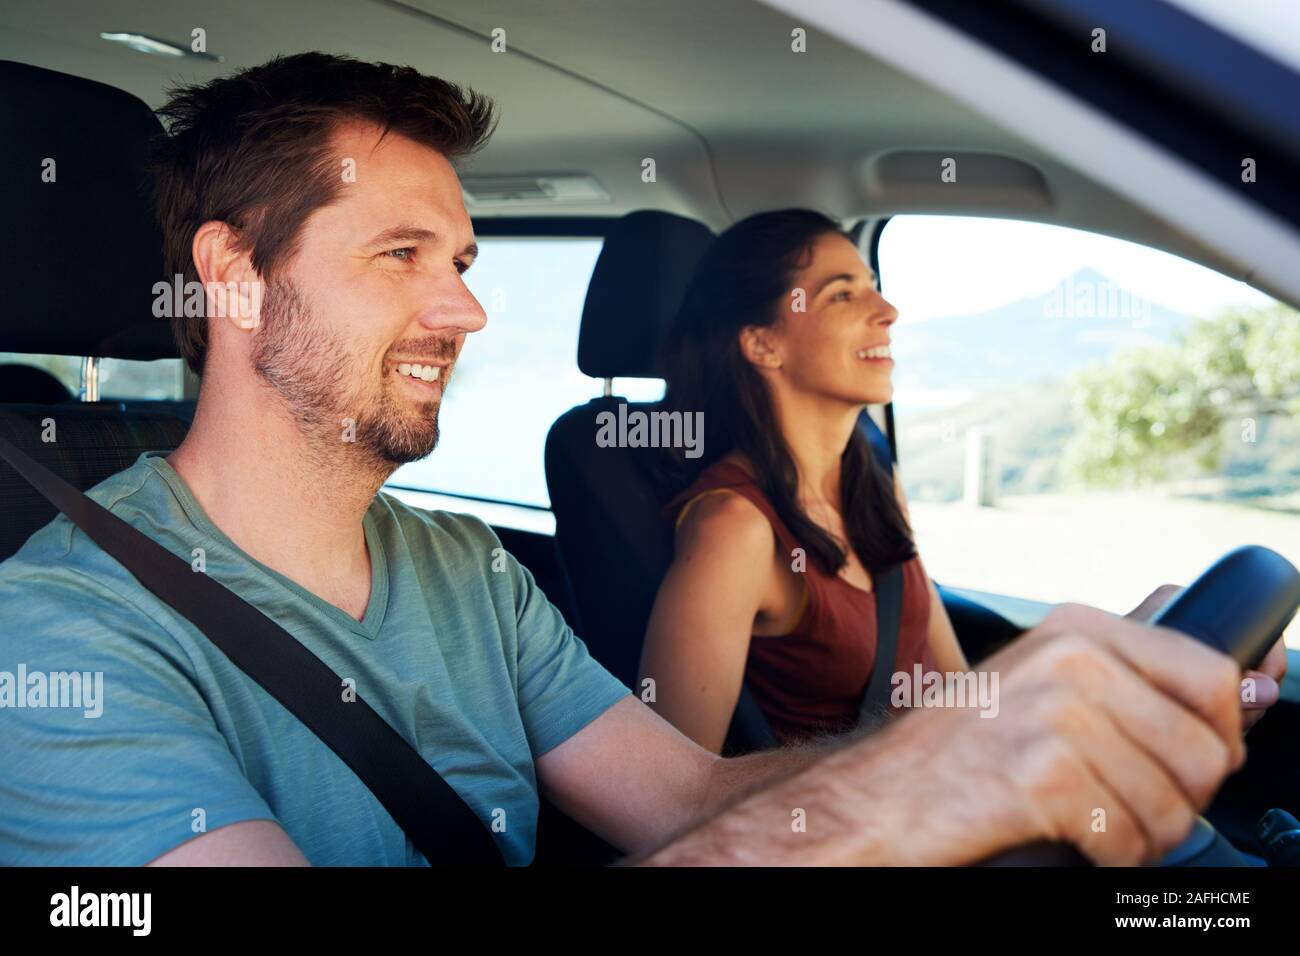 Mid adult white man driving car, his wife beside him in front passenger seat, close up, side view Stock Photo